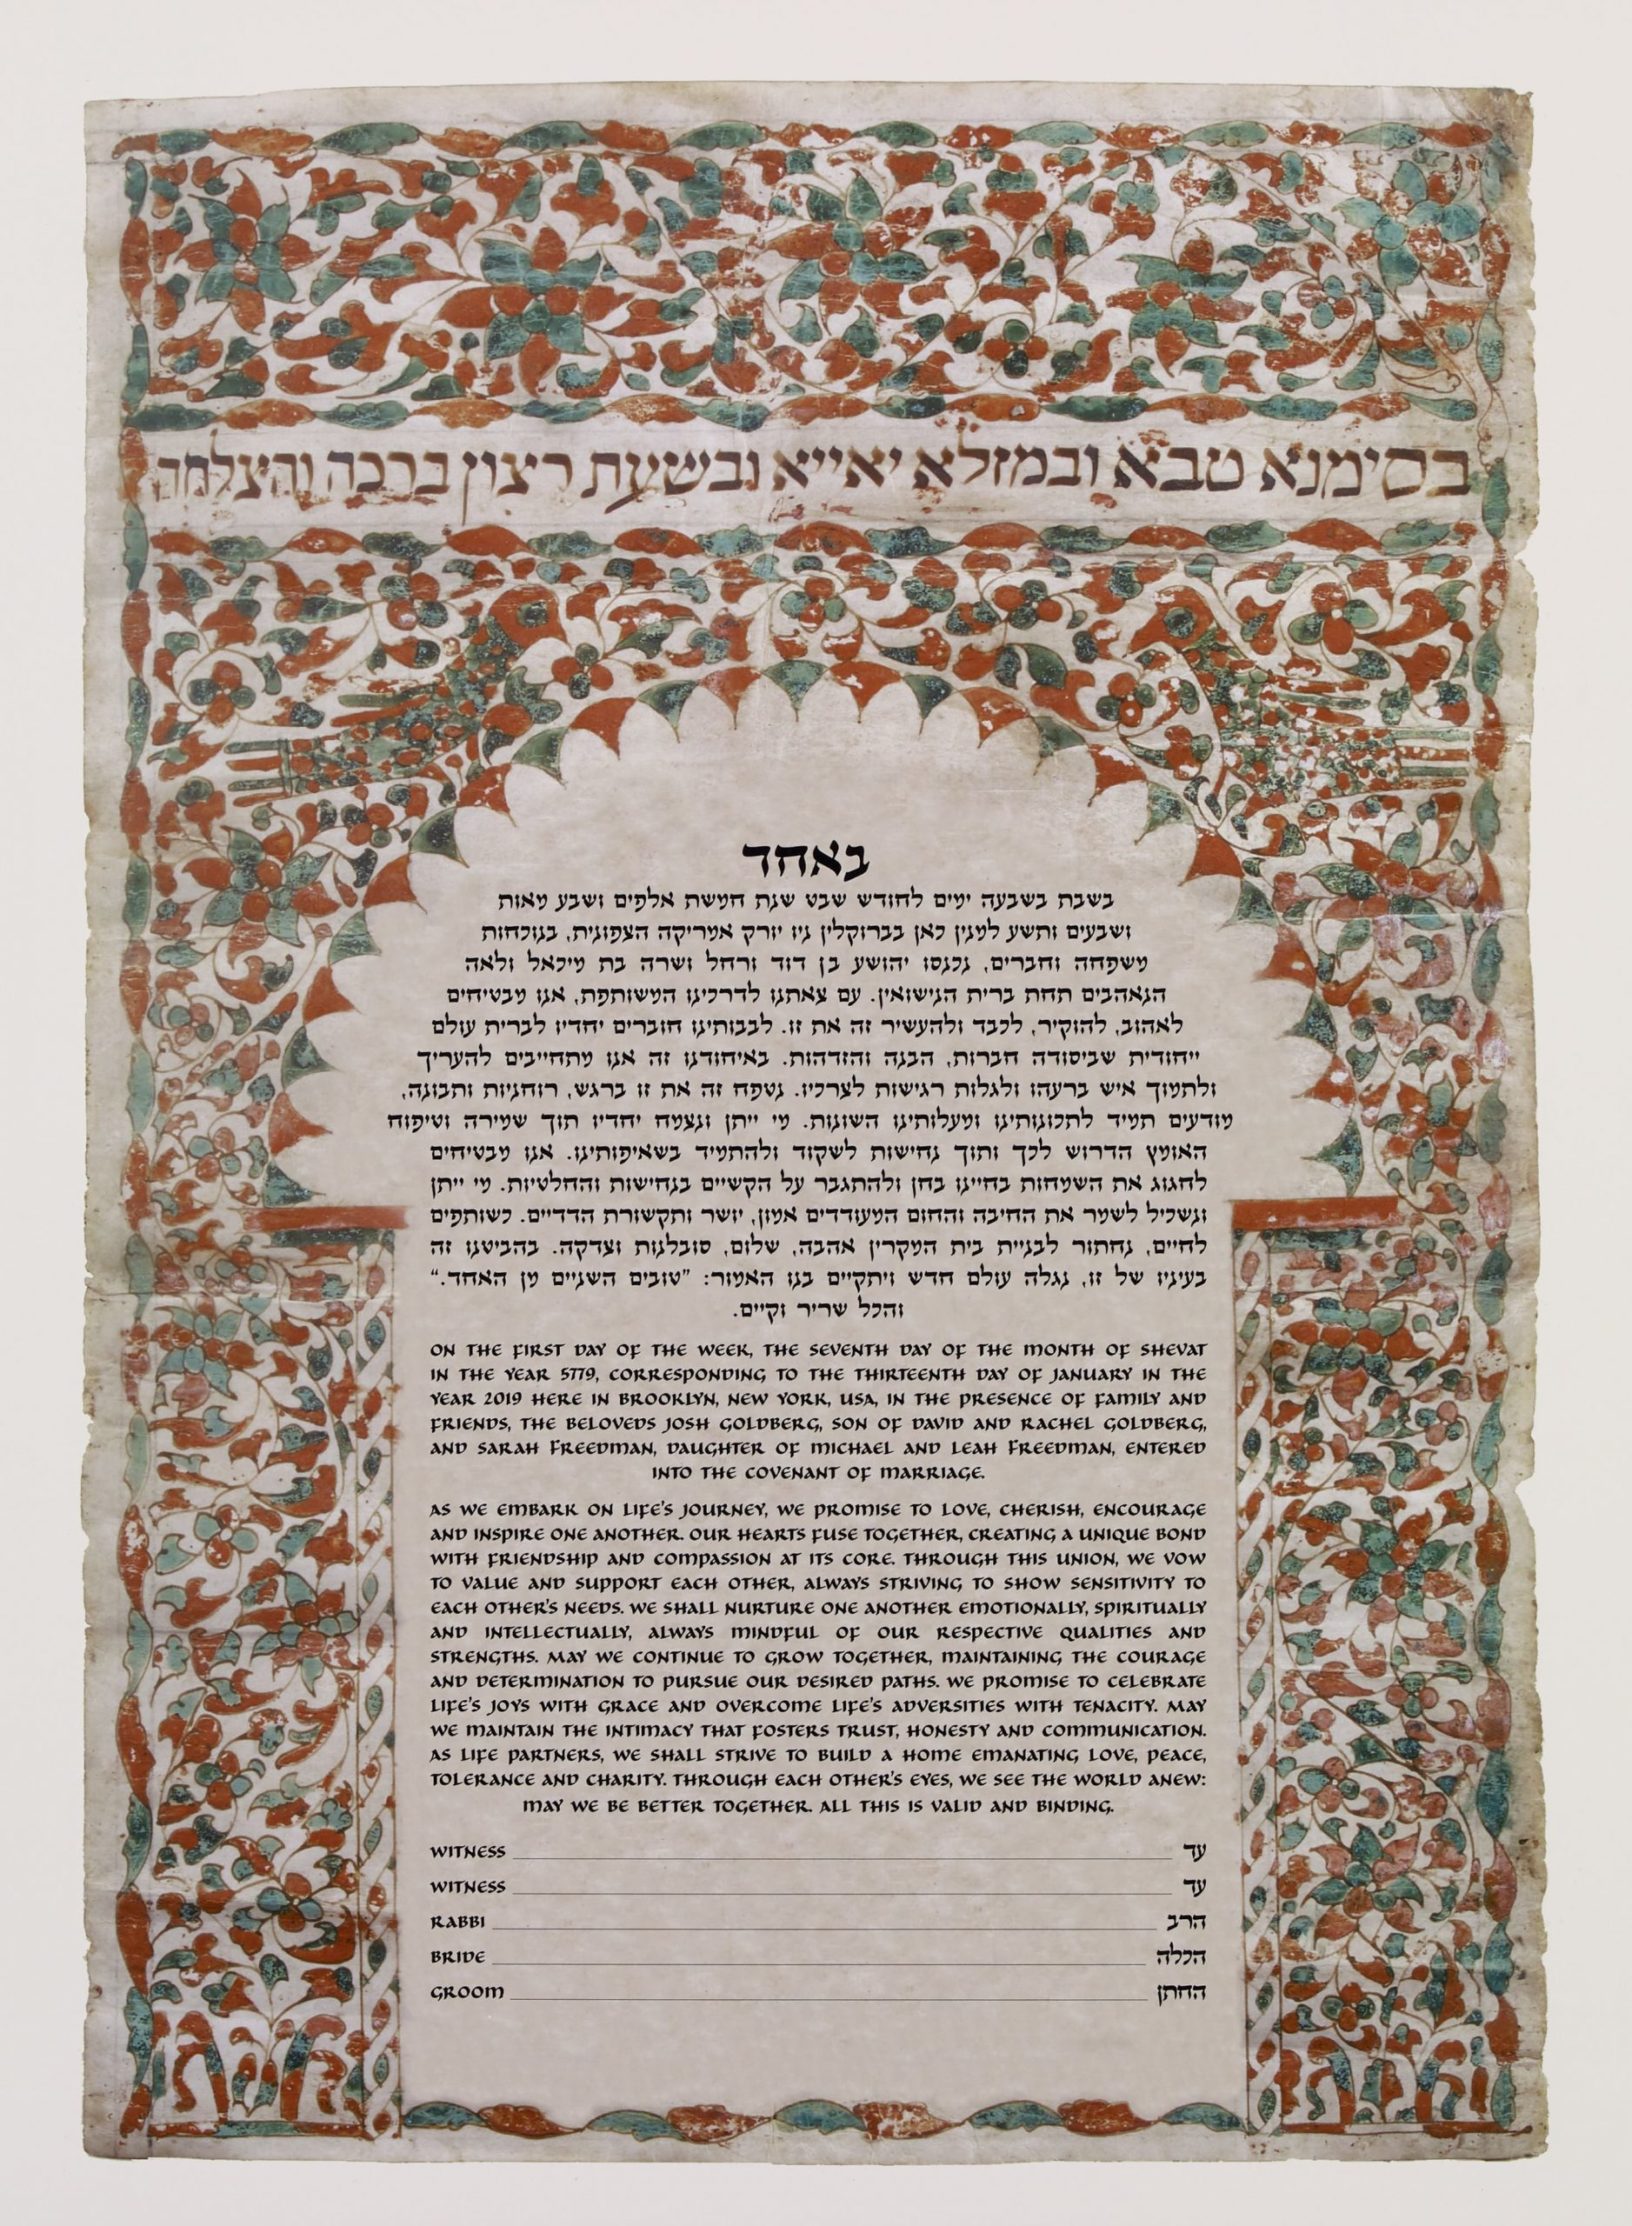 Tetouan, Morocco, 1837 Ketubah Designs by The Jewish Museum